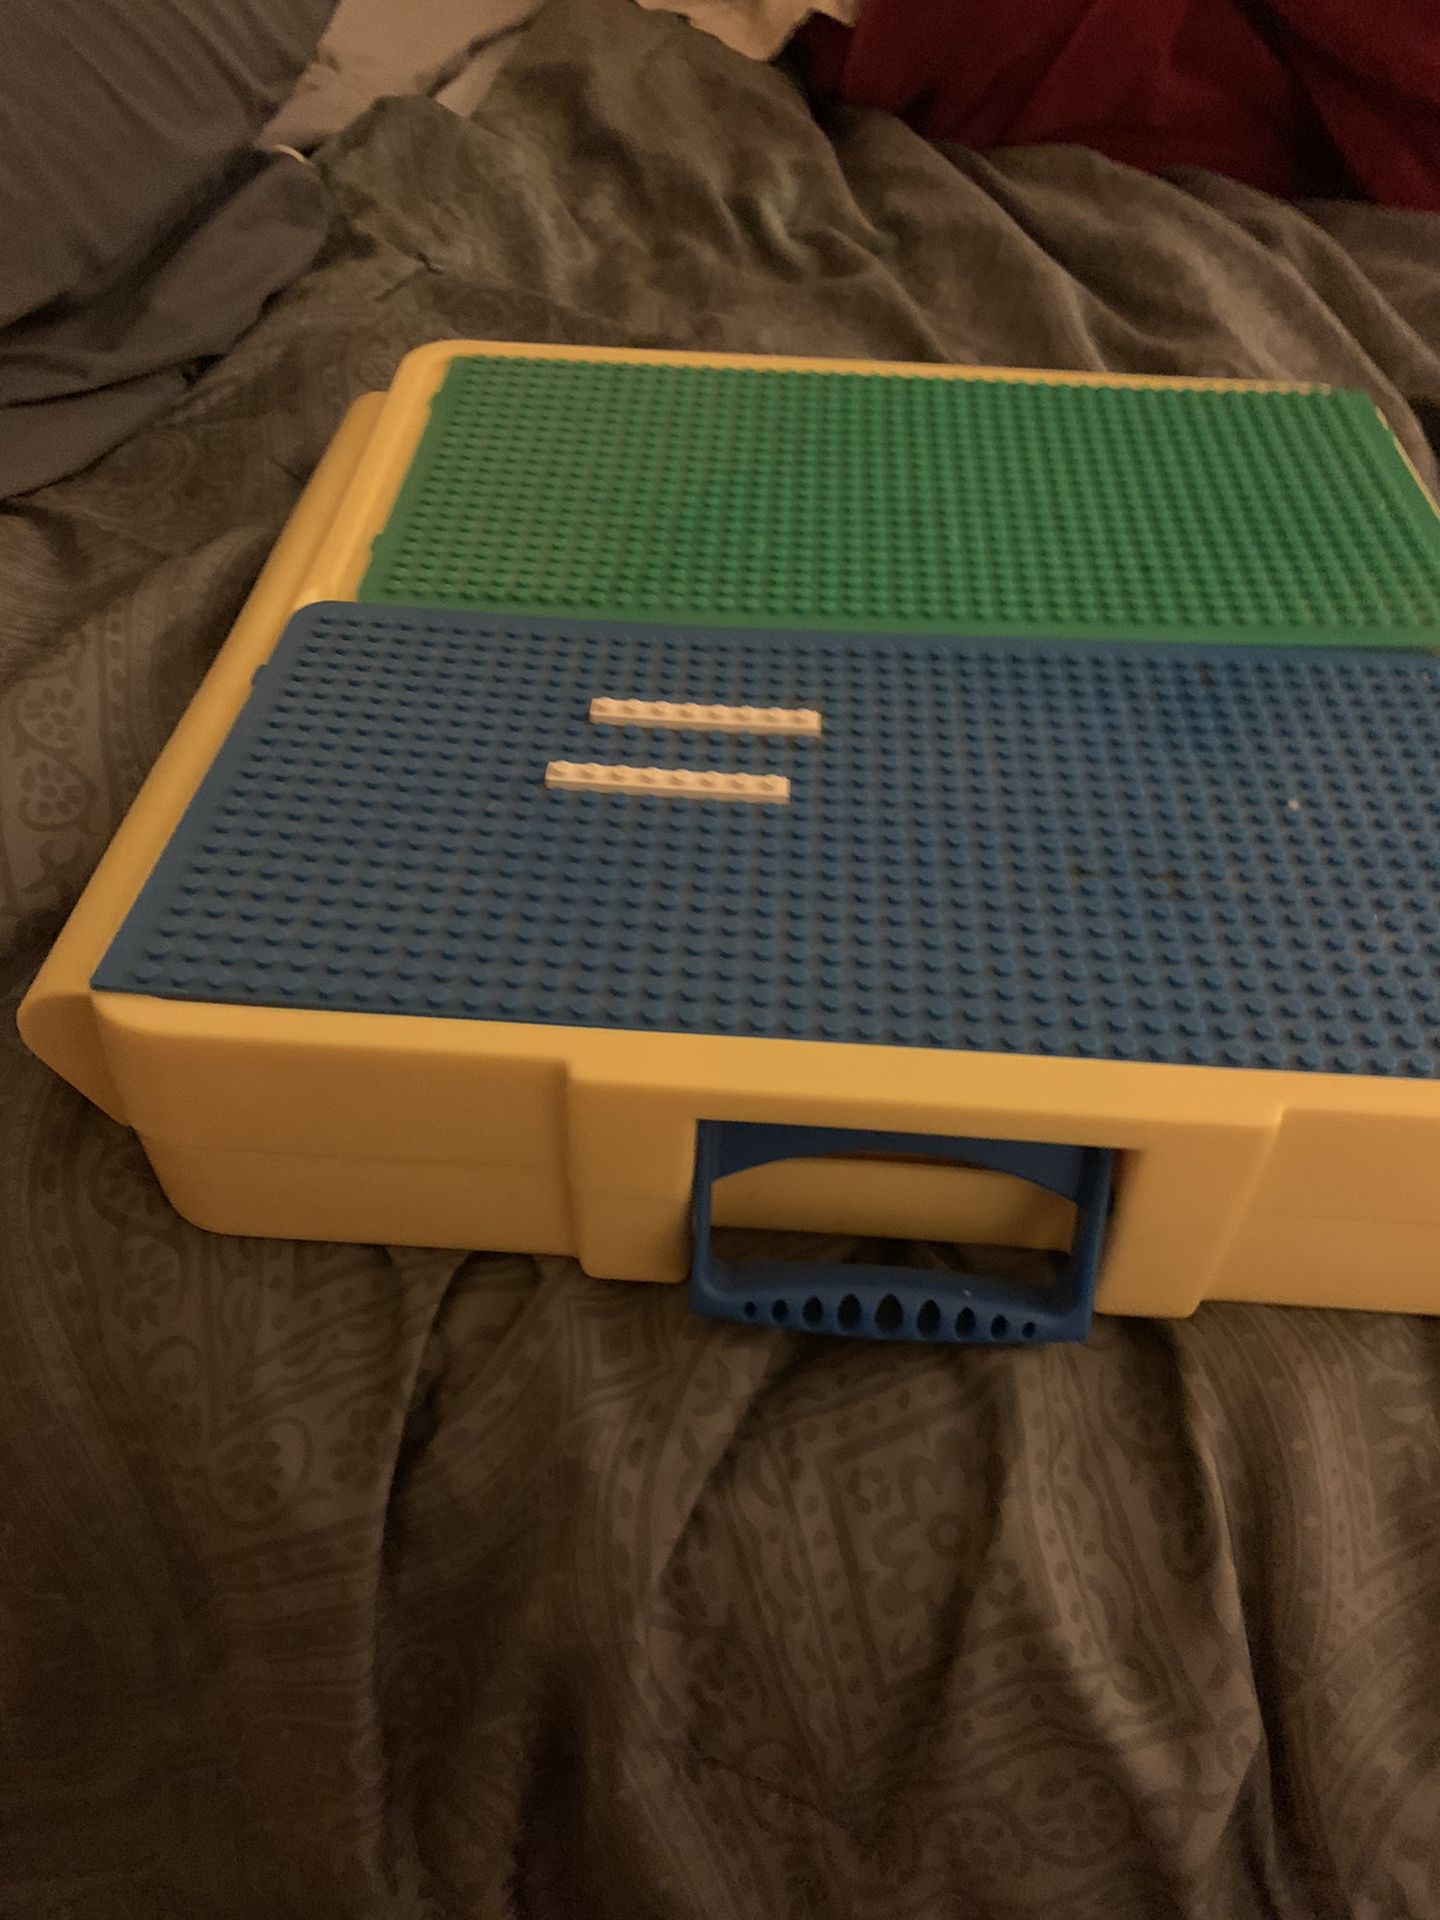 Lego Lap Desk with drawer and handle